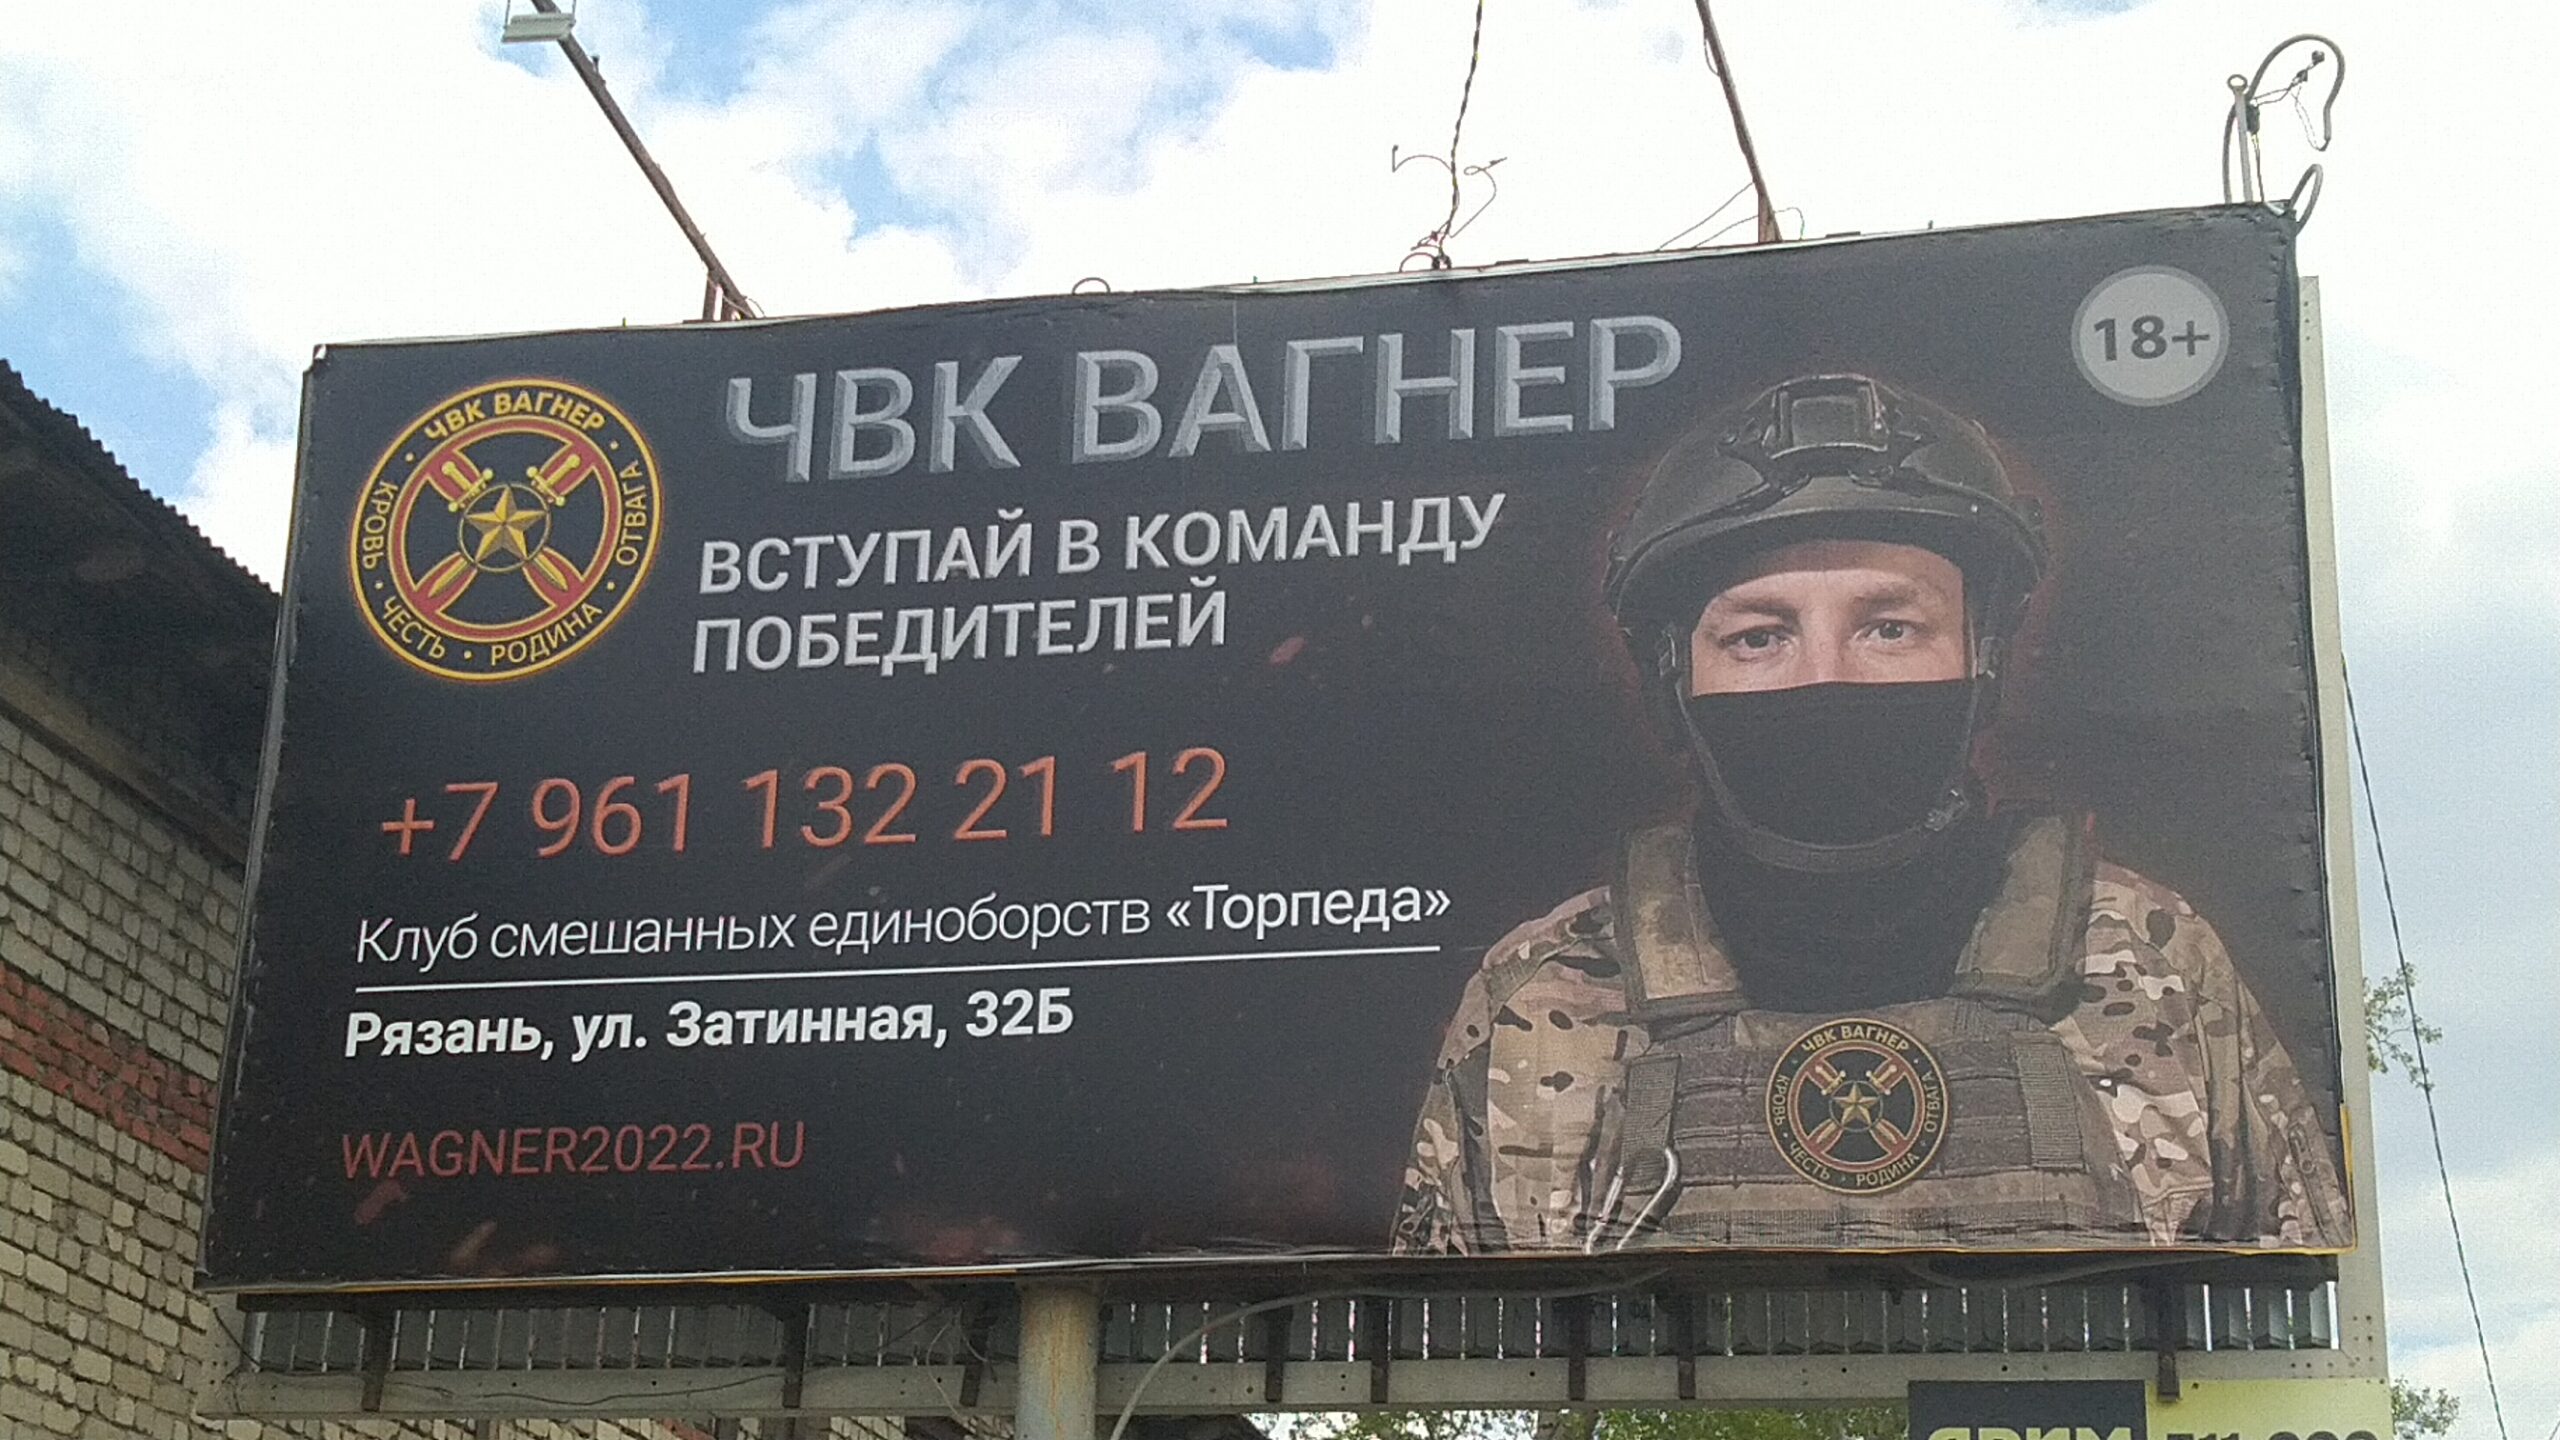 Billboard was advertising service in PMC Wagner, probably recruiting people for war in Ukraine